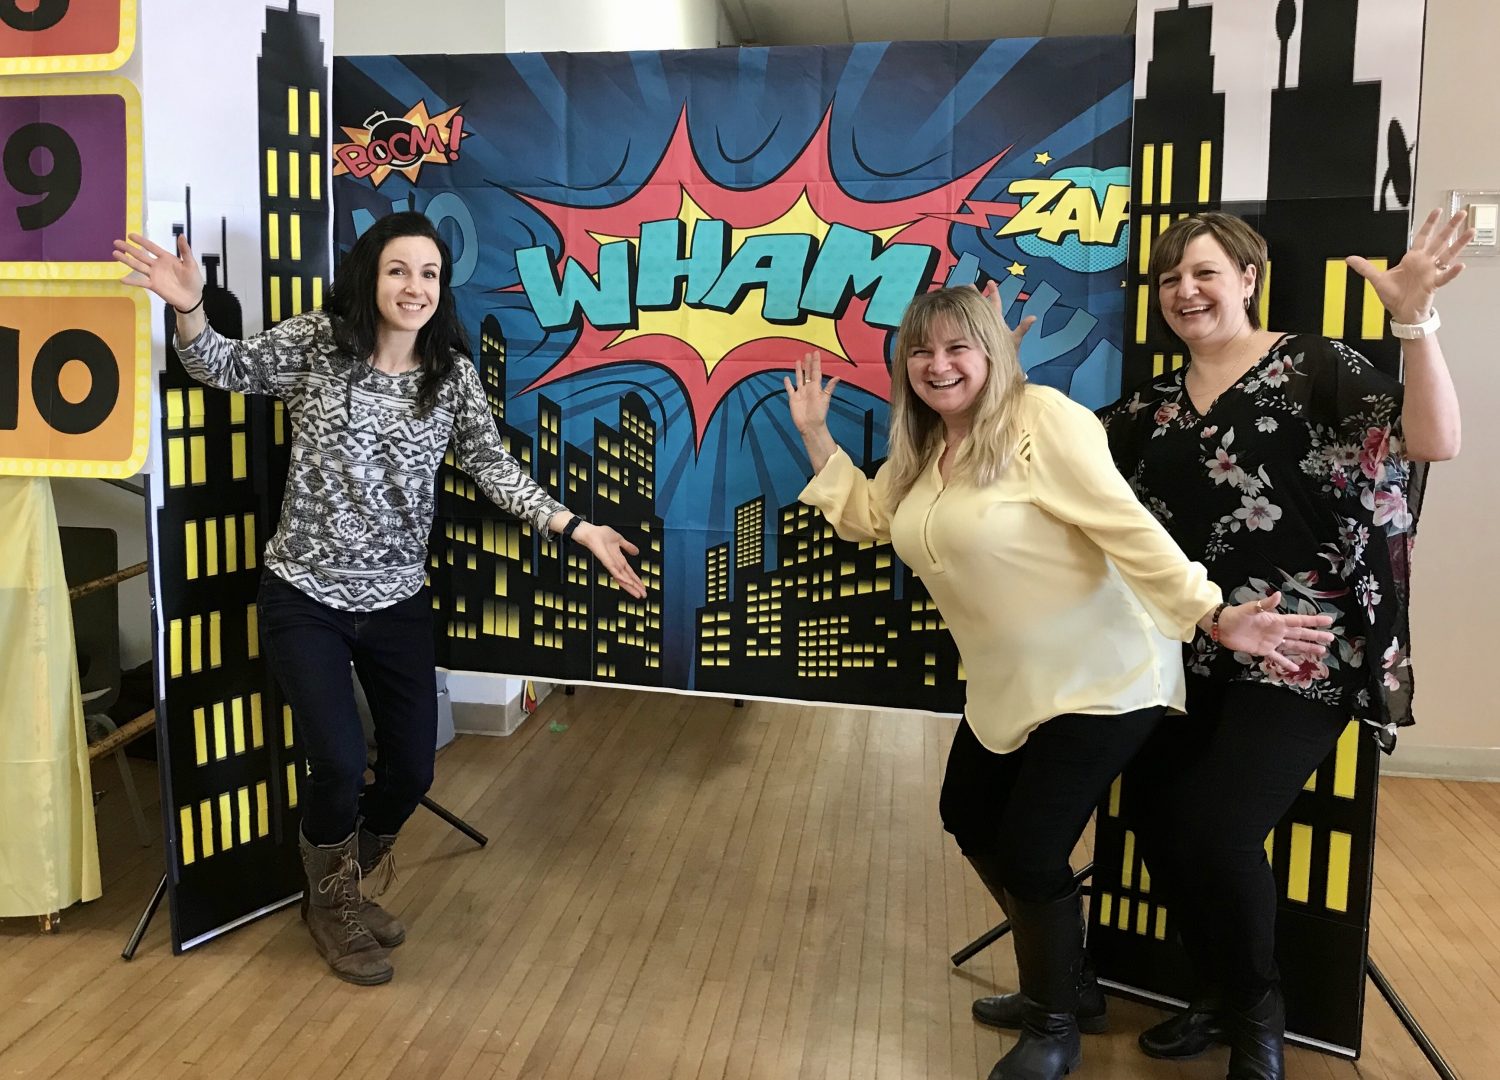 Image of community health workers from the UNIVI health center, Josée Pitre, Julie Raymond and Joanne Violette, are in Warren to lead activities inspired by the game show "Press Your Luck" for their 12th International Women's Day.